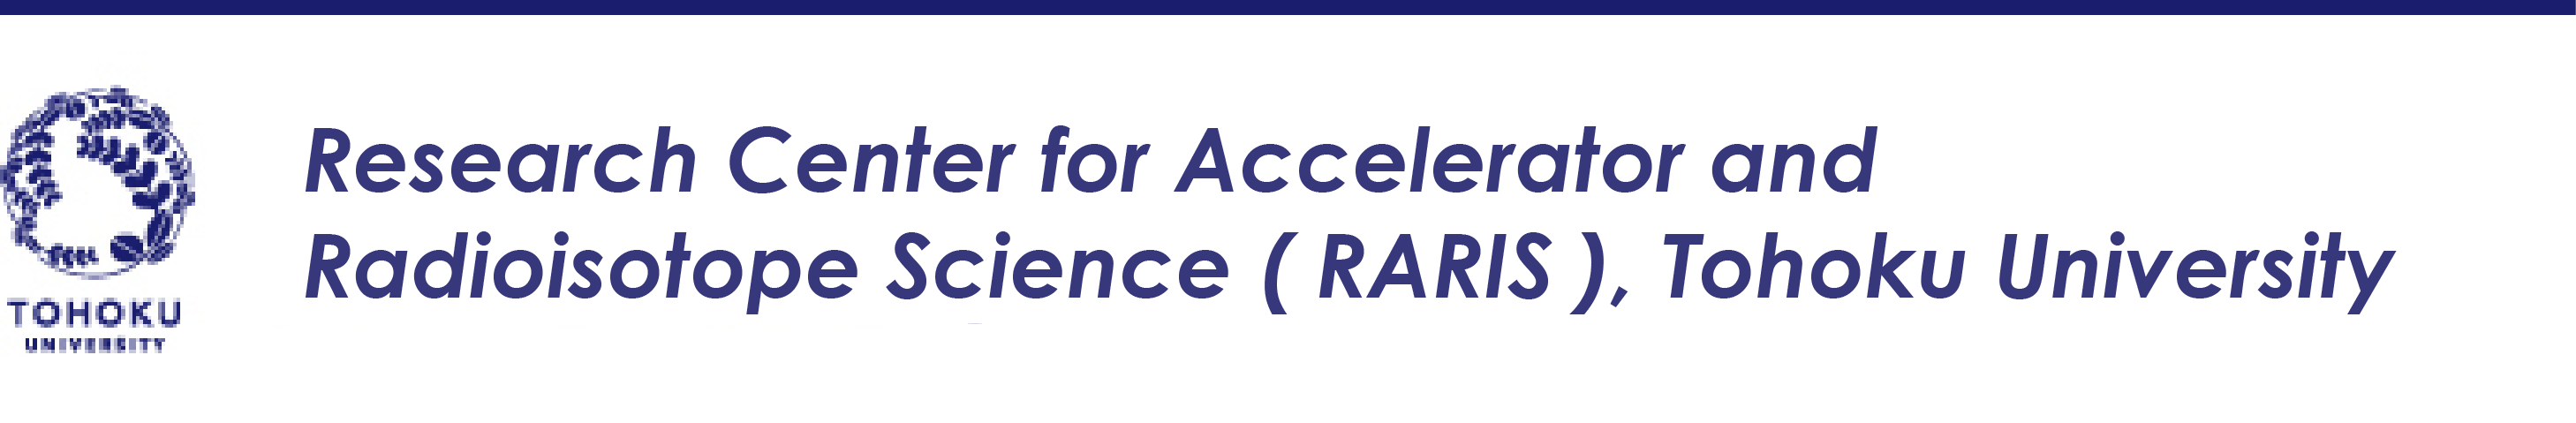 Research Center for Accelerator and Radioisotope Science (RARIS), Tohoku University